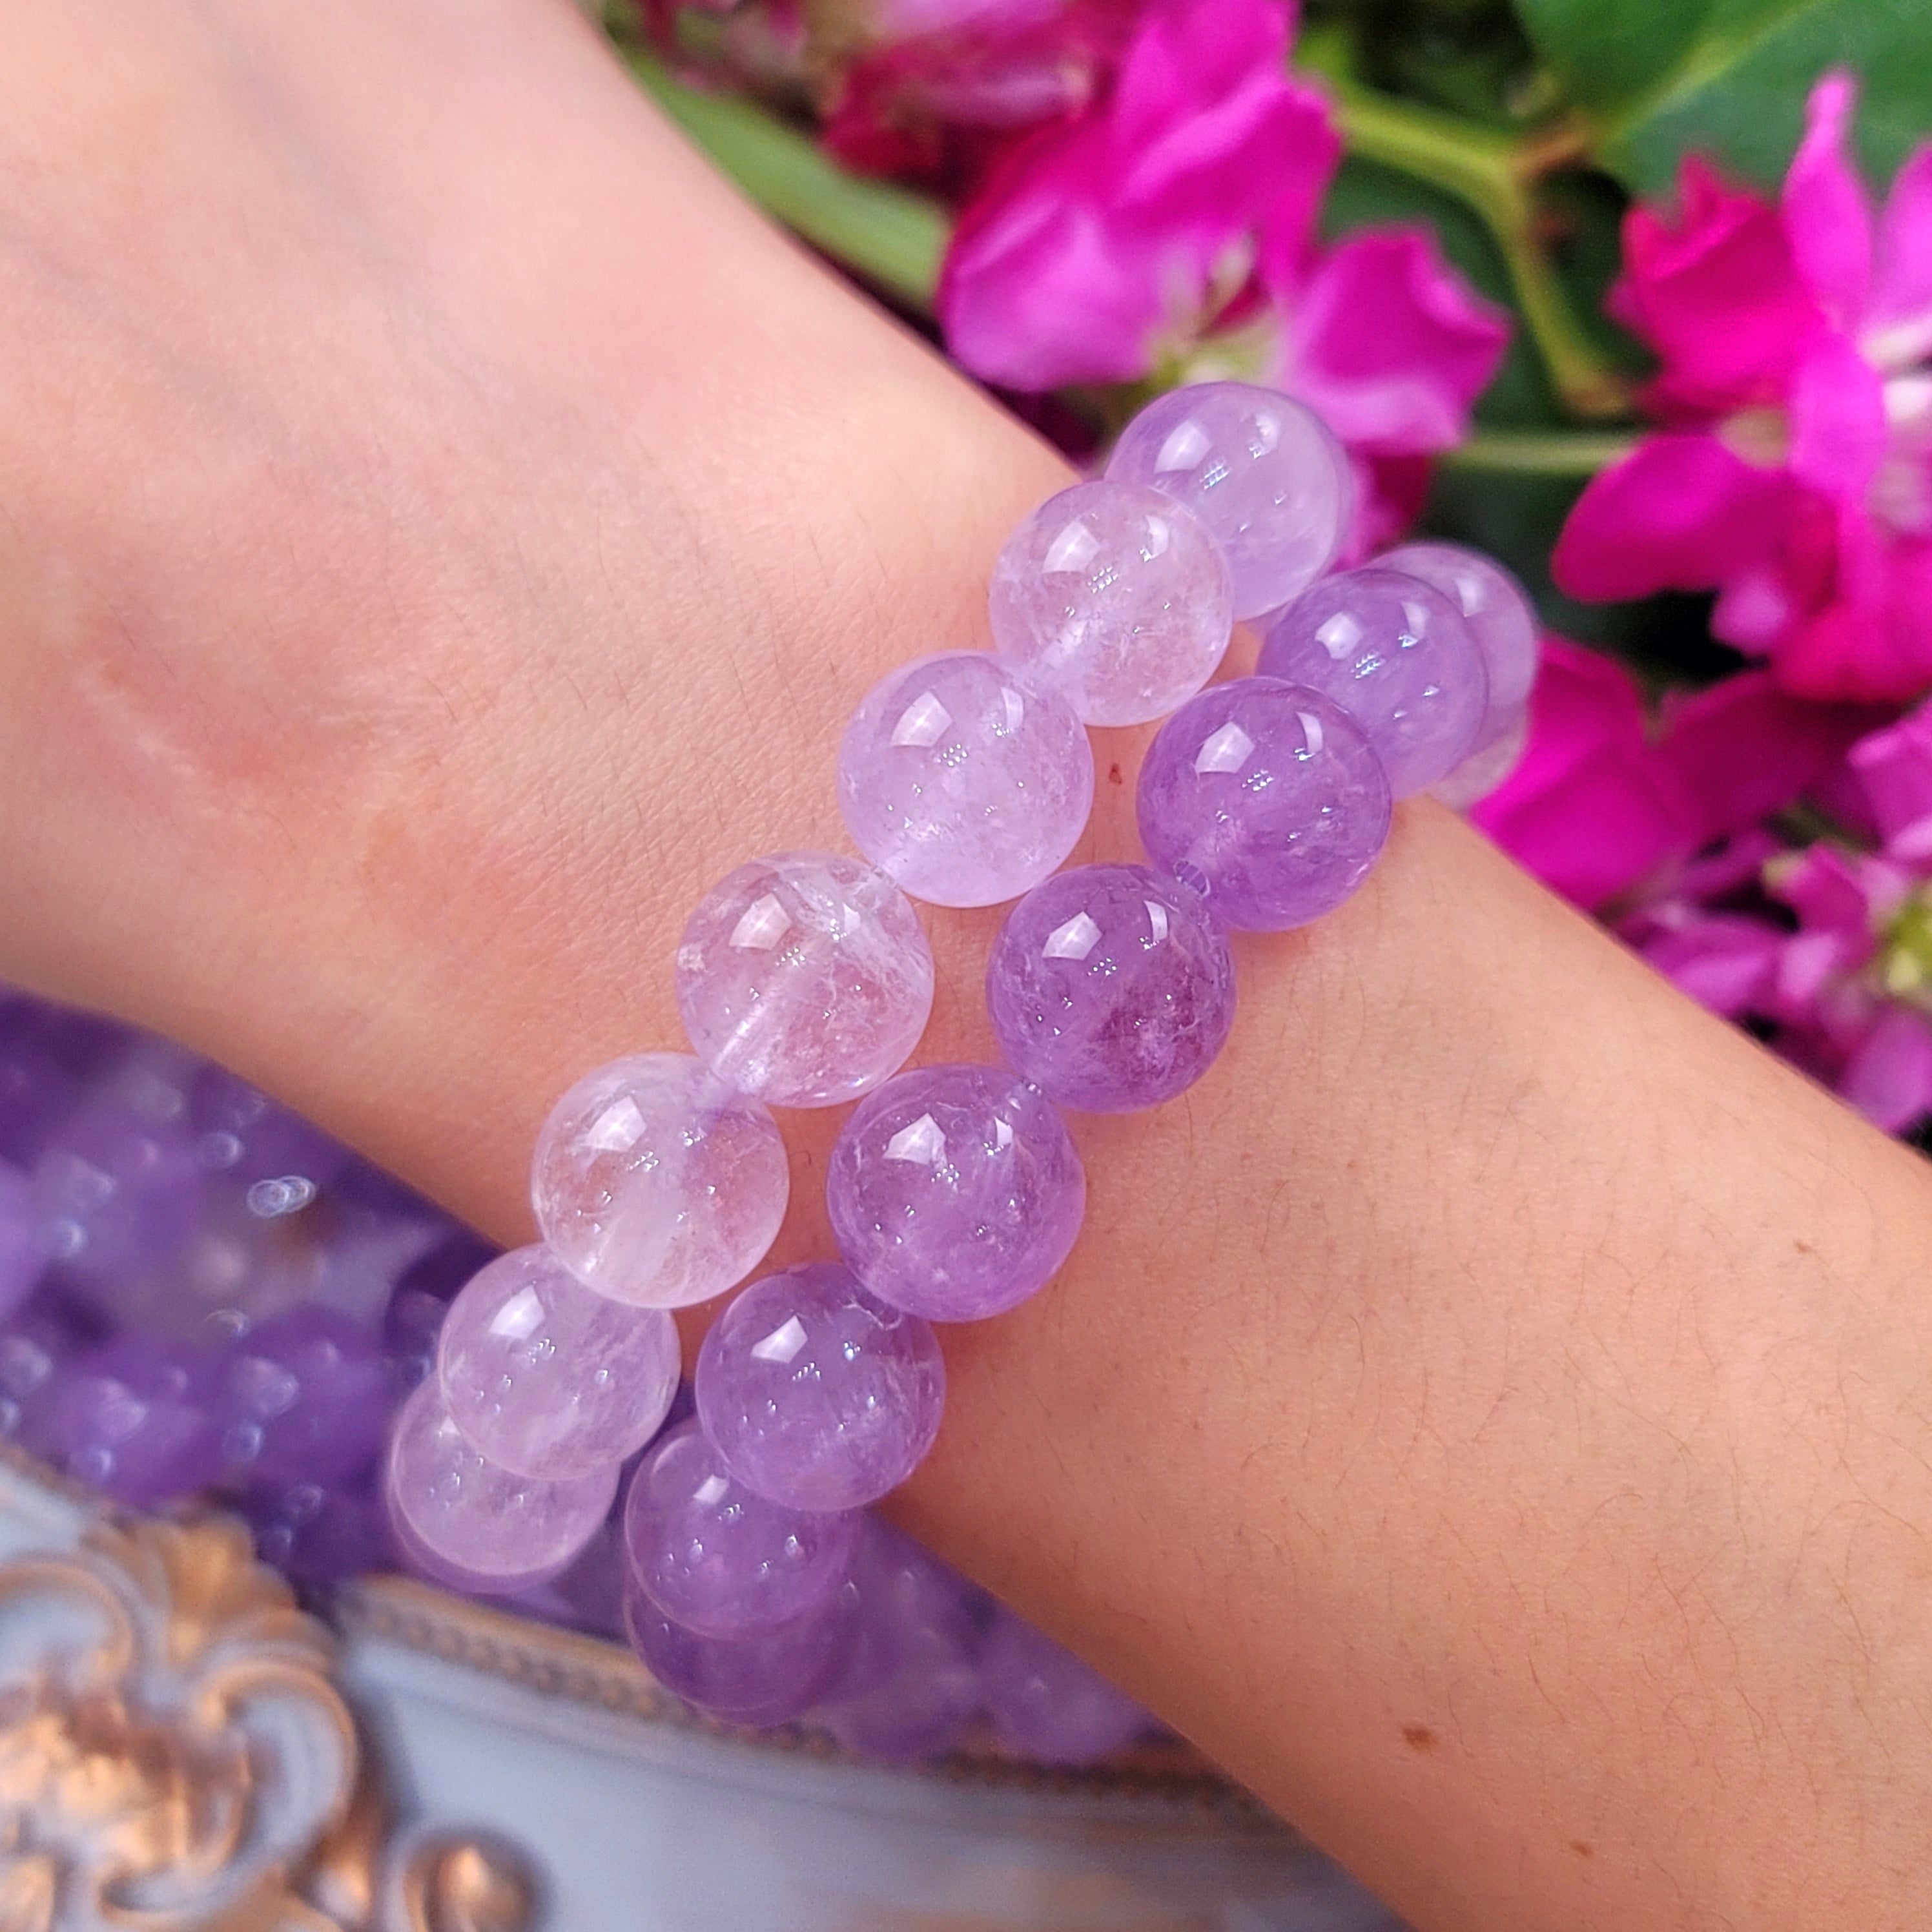 Amethyst Waterfall Bracelet for Intuition, Connection with the Divine and Sobriety